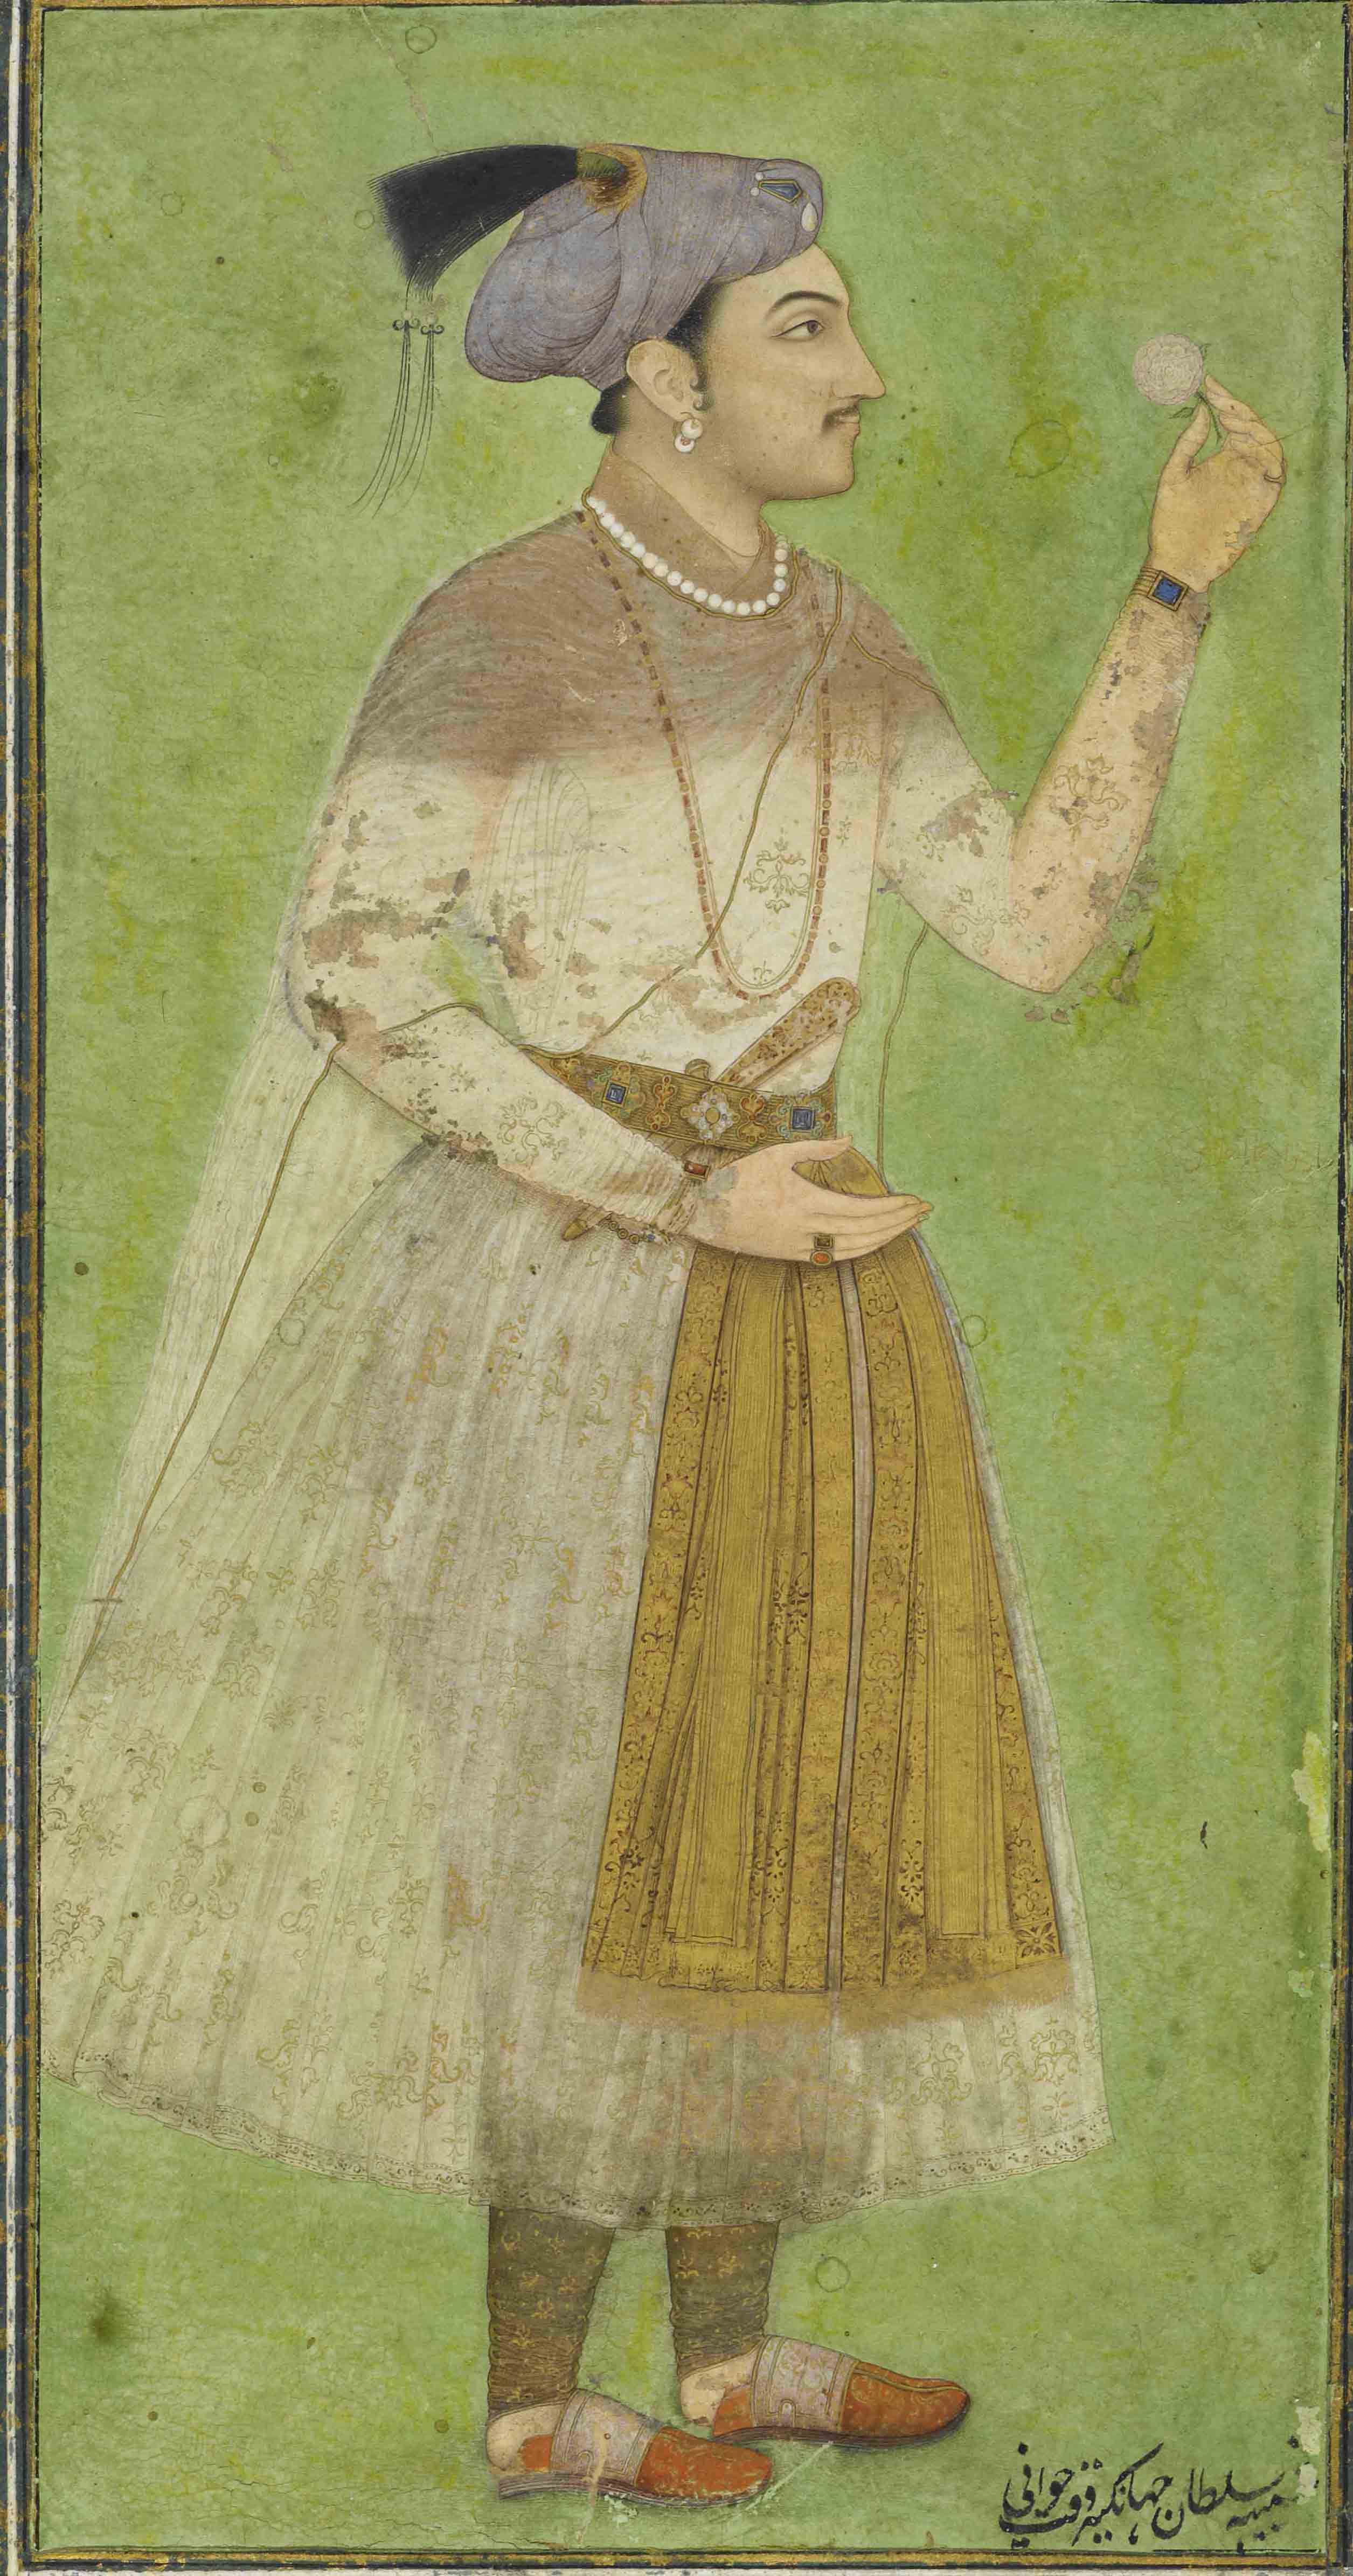 Research thesis mughal rulers